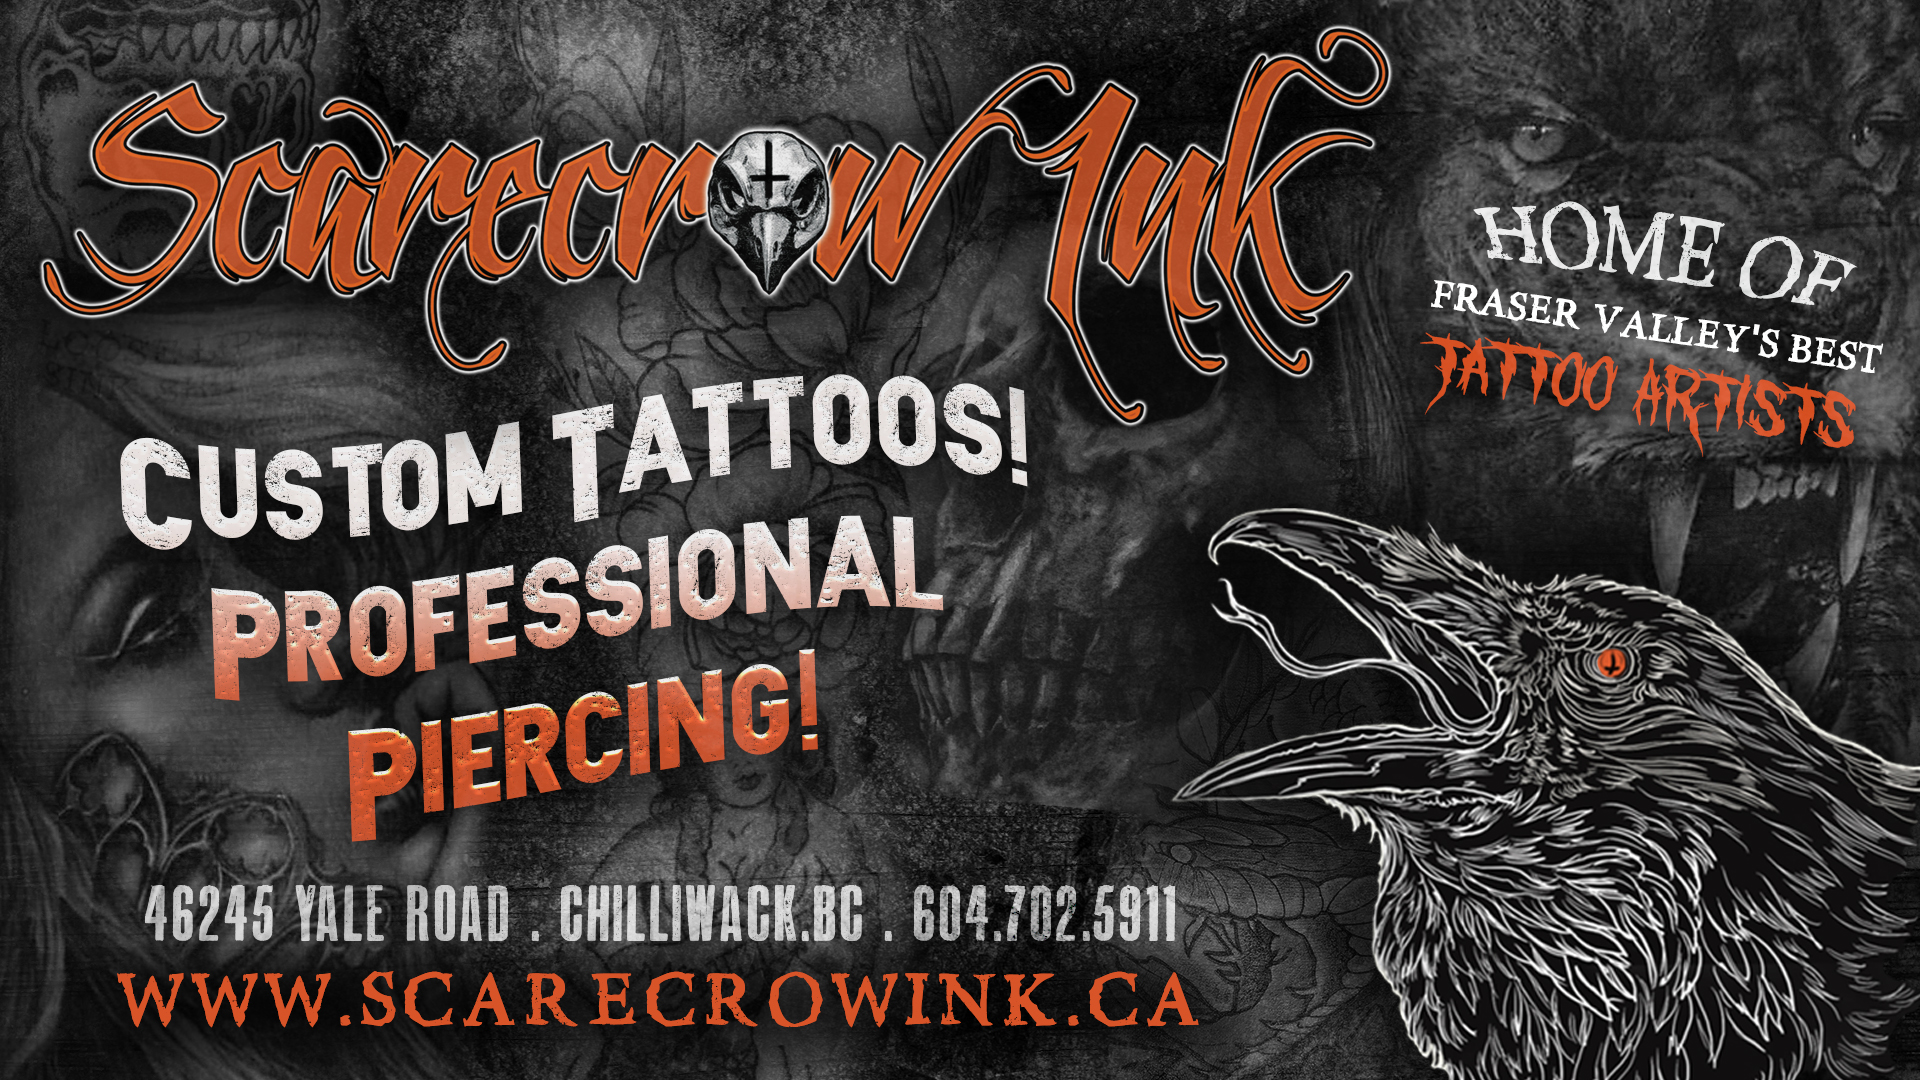 Scarecrow Ink